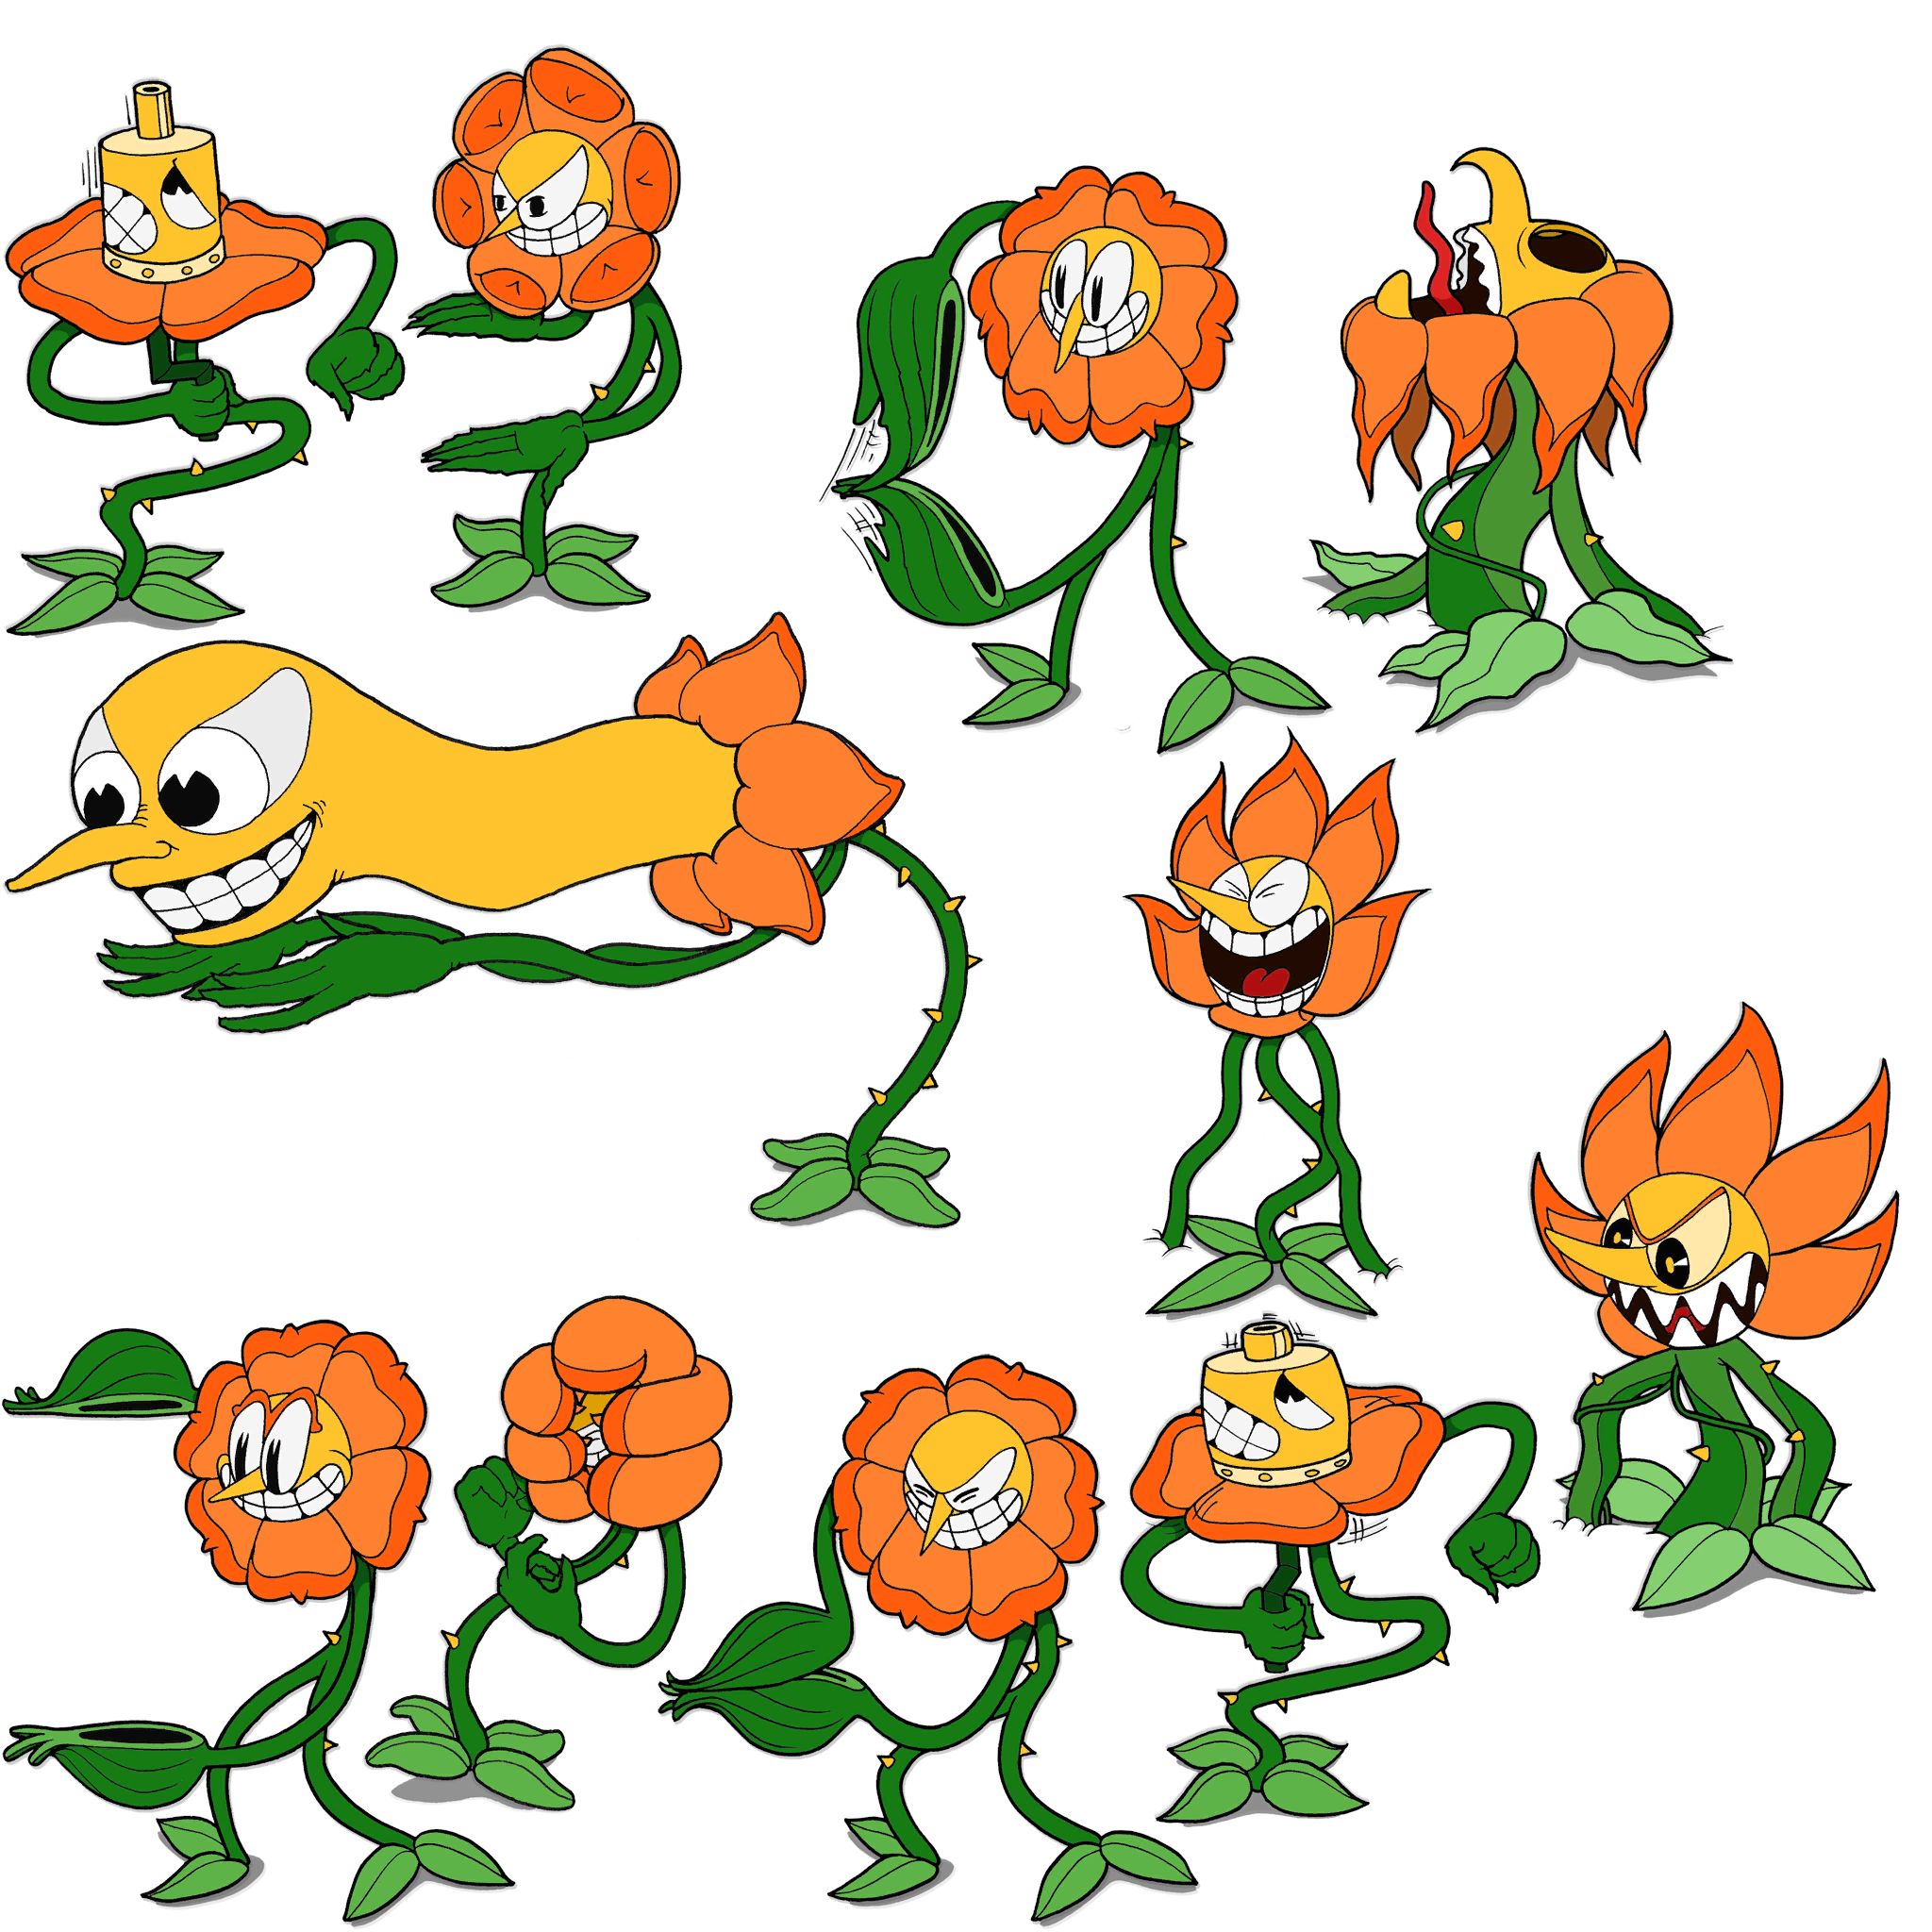 Sprite sheet of cagney. Planting clipart flora